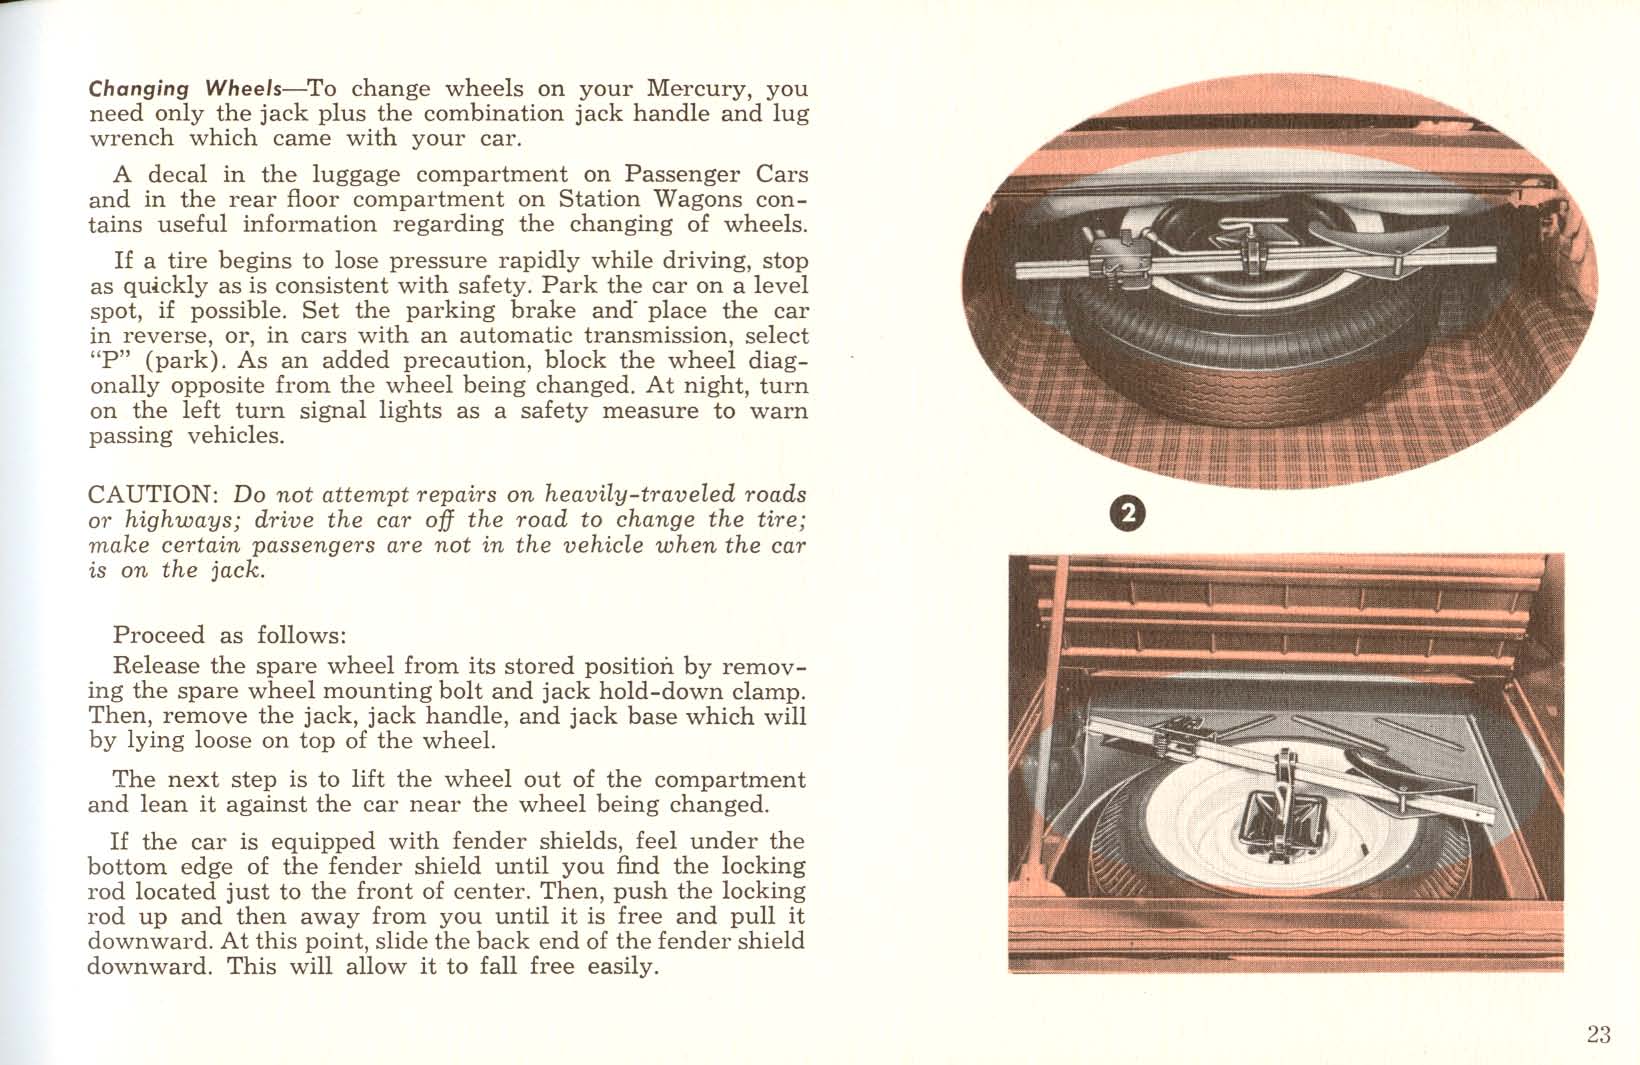 1961 Mercury Owners Manual Page 23